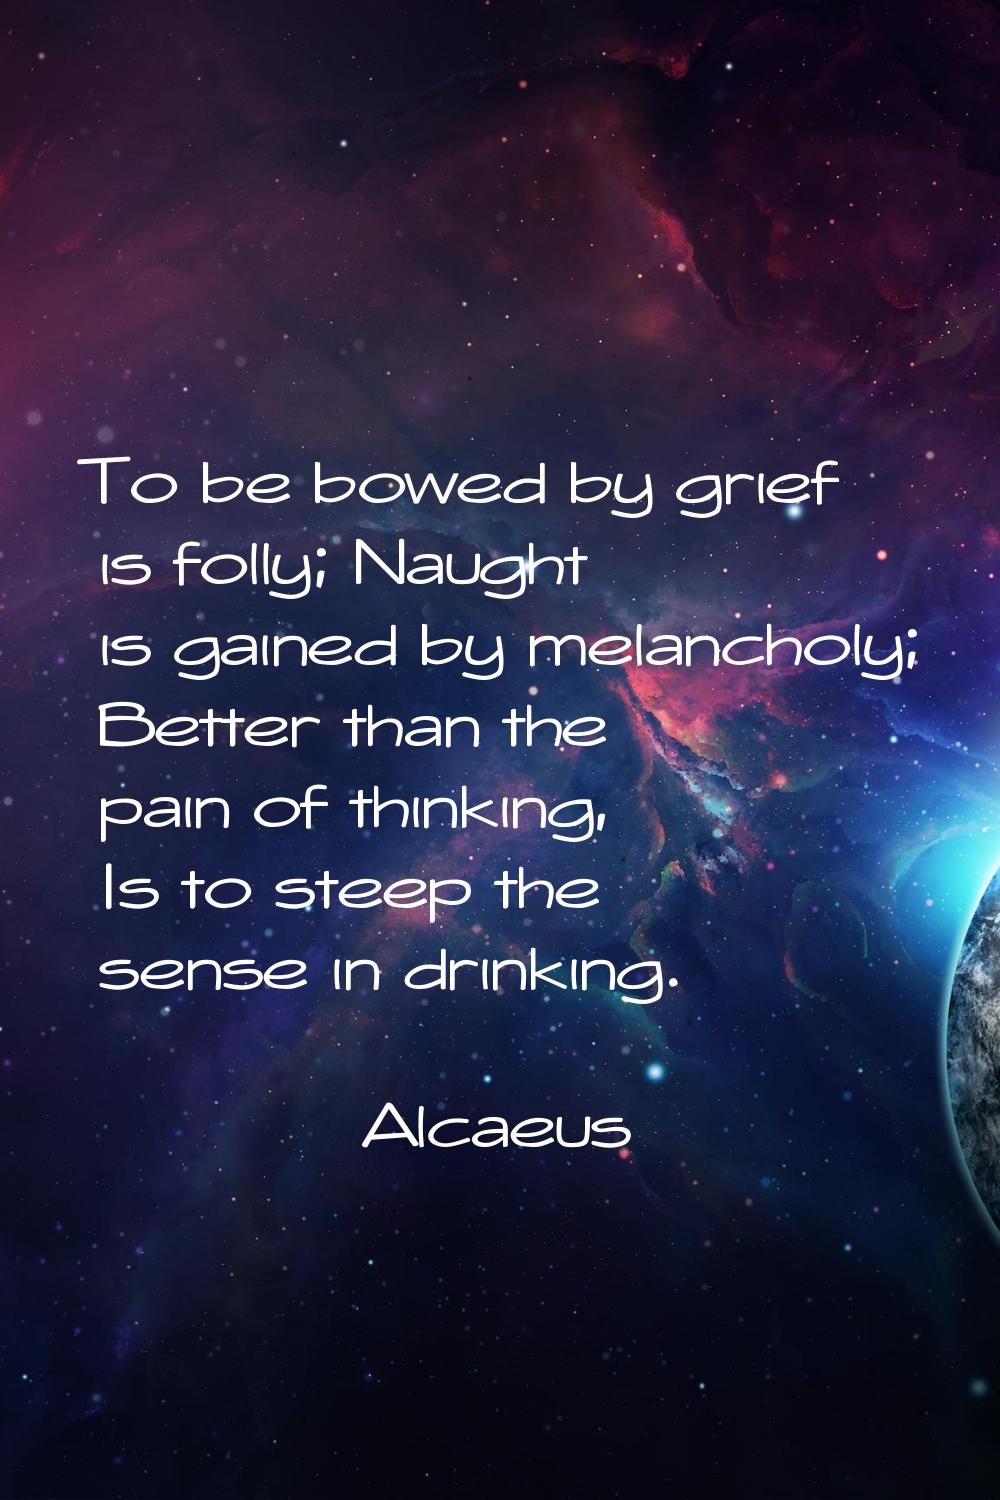 To be bowed by grief is folly; Naught is gained by melancholy; Better than the pain of thinking, Is